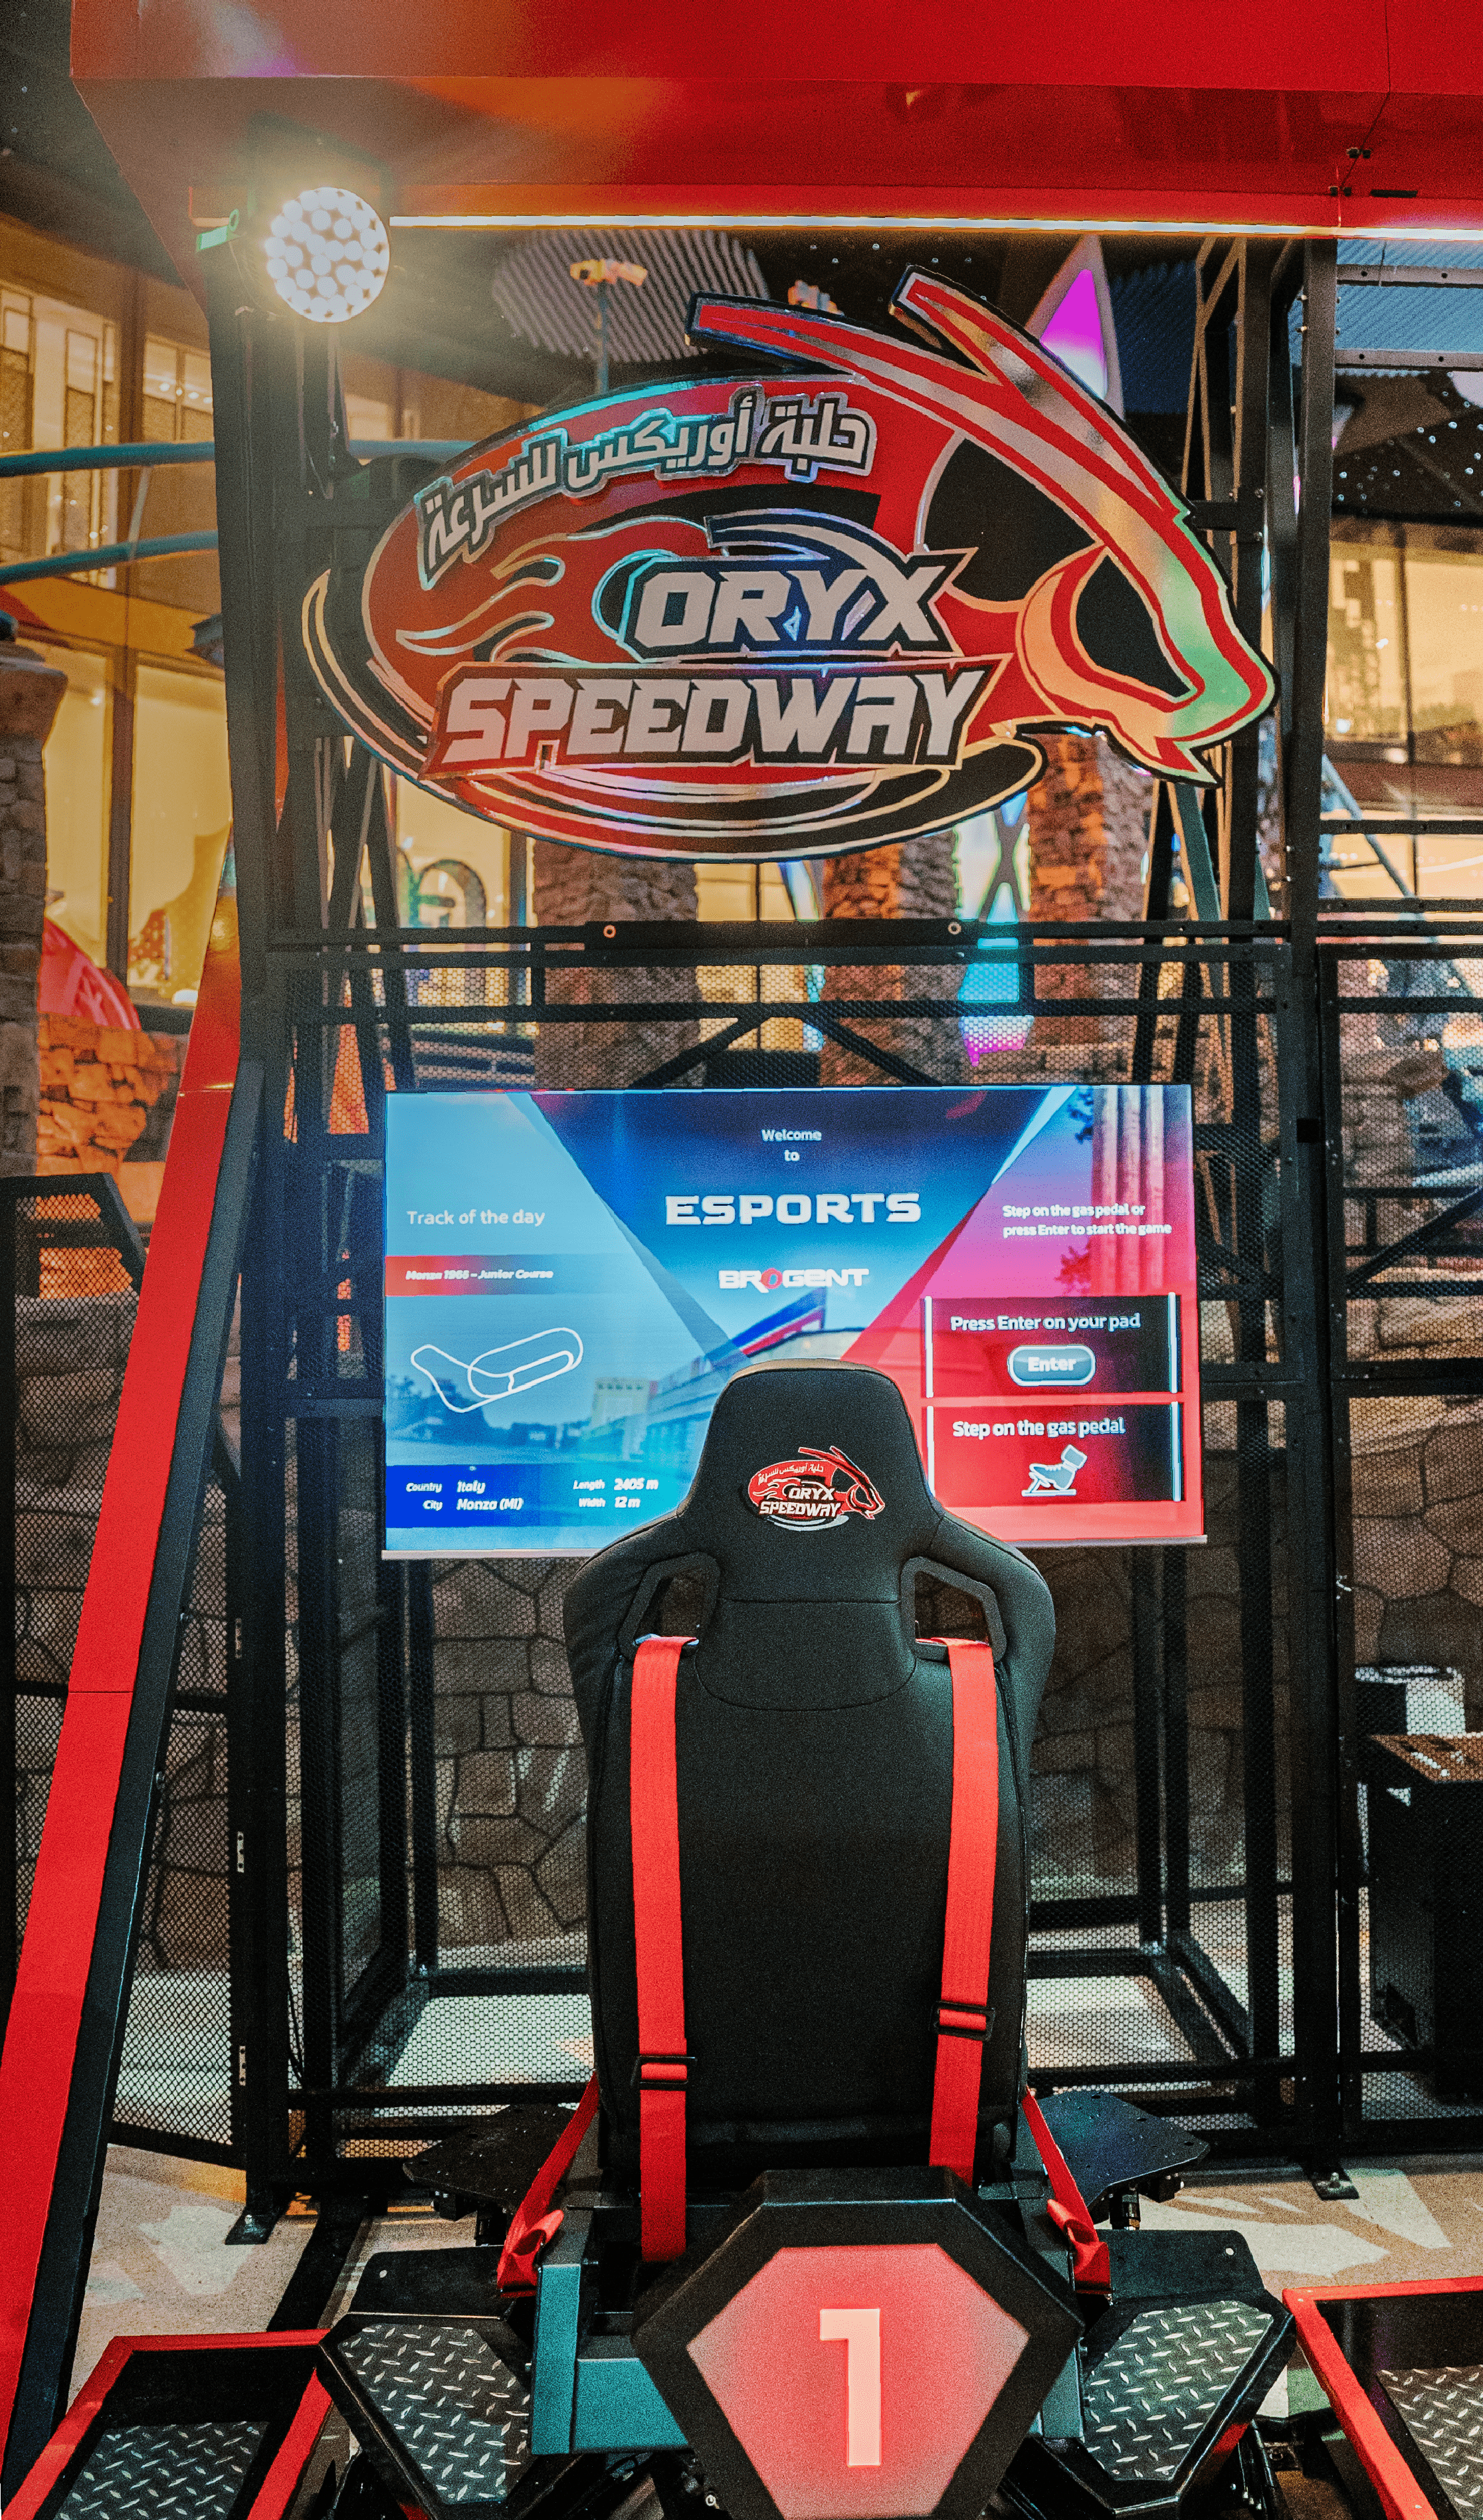 QUEST ACCELERATES THE THRILL WITH THE LAUNCH OF QUEST FOR SPEED AND ORYX SPEEDWAY RACING SIMULATORS